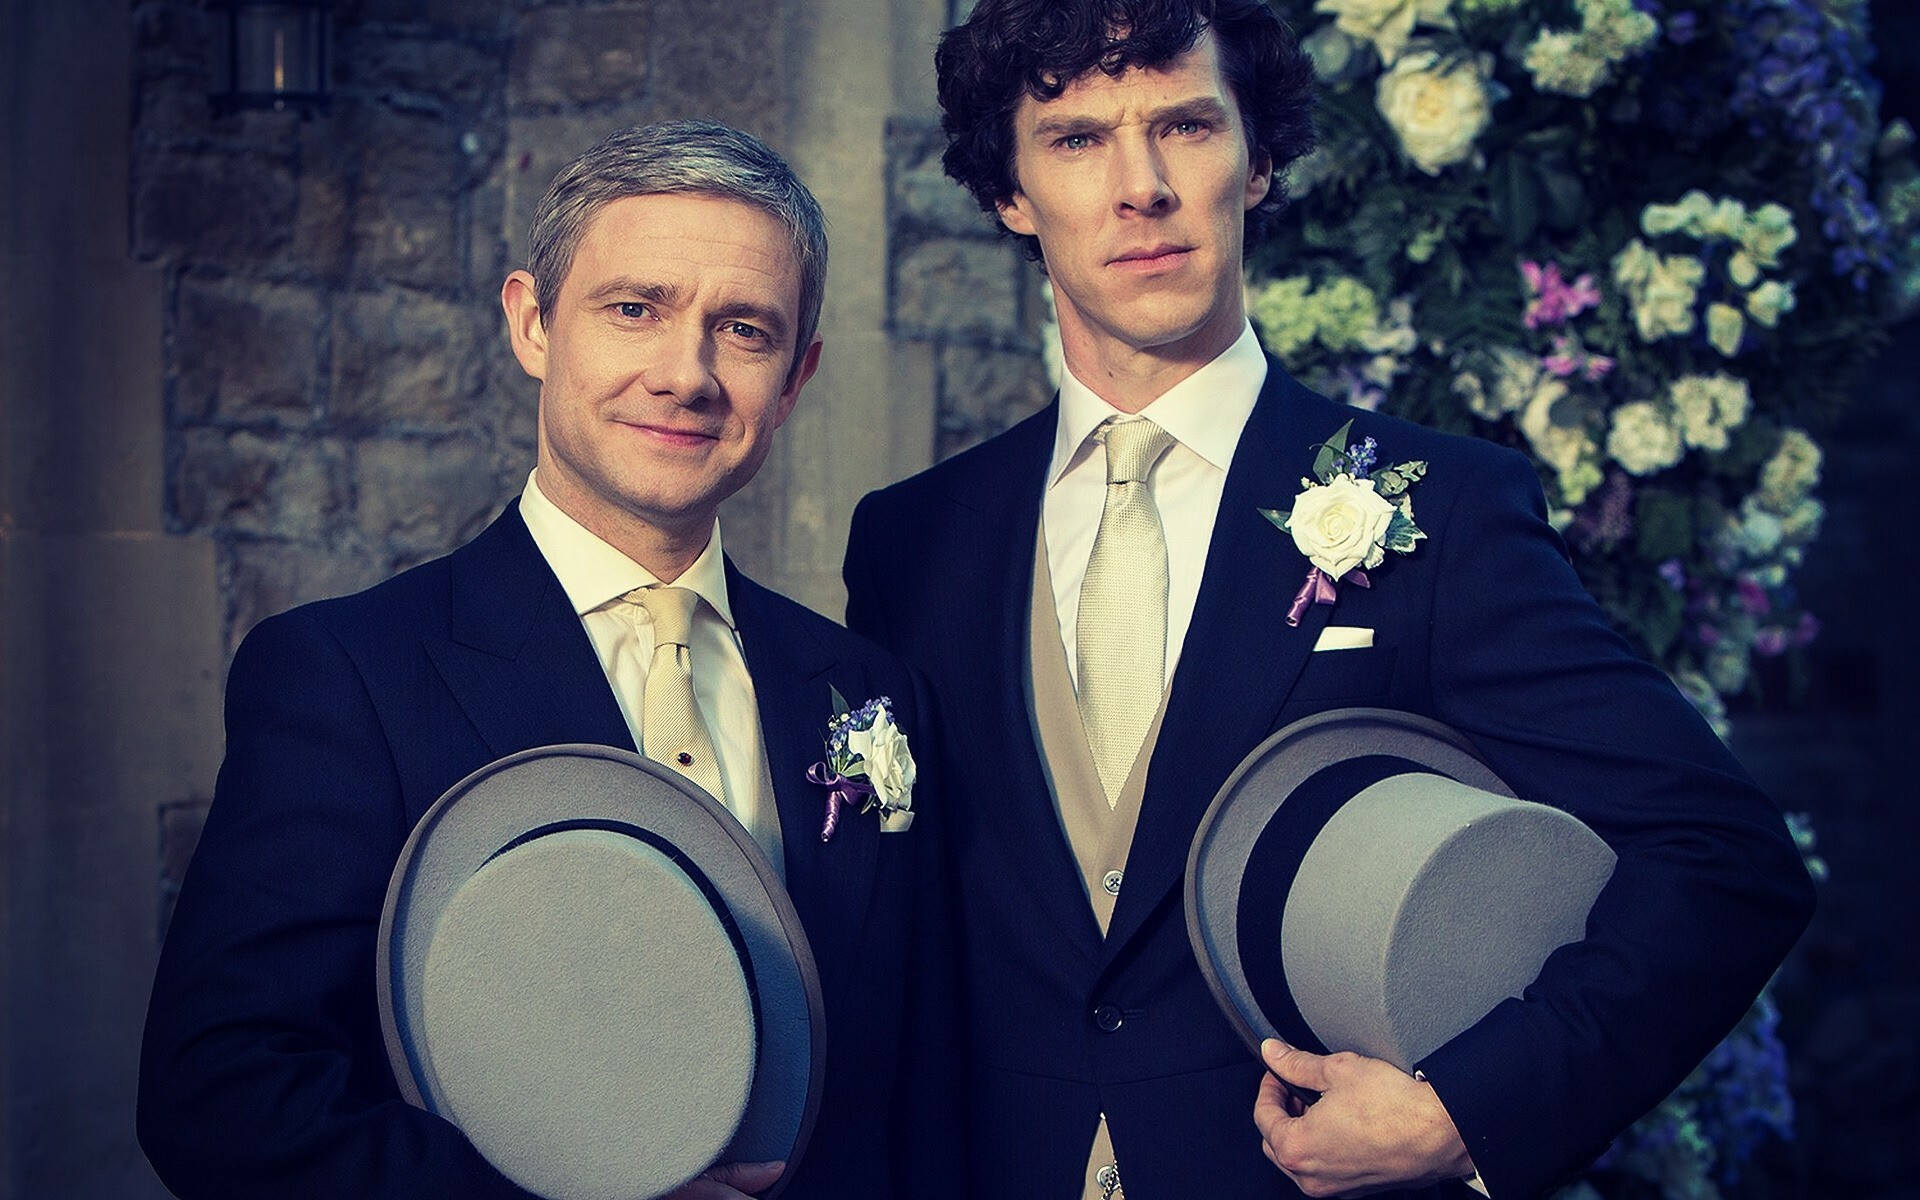 Sherlock (TV Series): Holmes and Watson from the 2010 TV show. 1920x1200 HD Wallpaper.